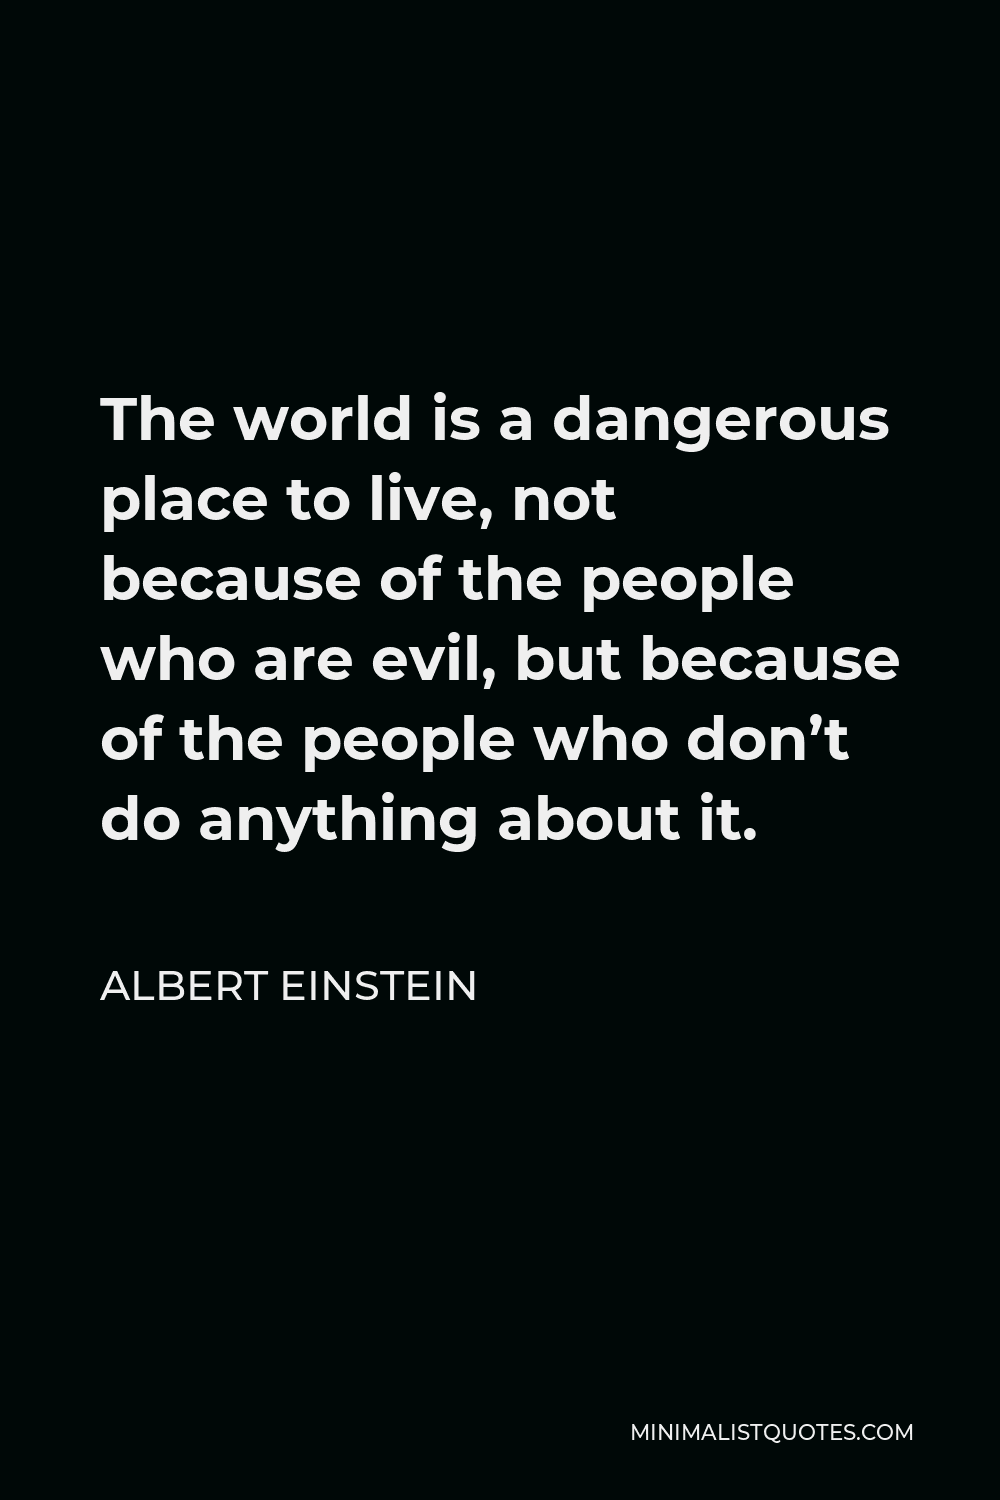 Albert Einstein Quote - The world is a dangerous place to live, not because of the people who are evil, but because of the people who don’t do anything about it.